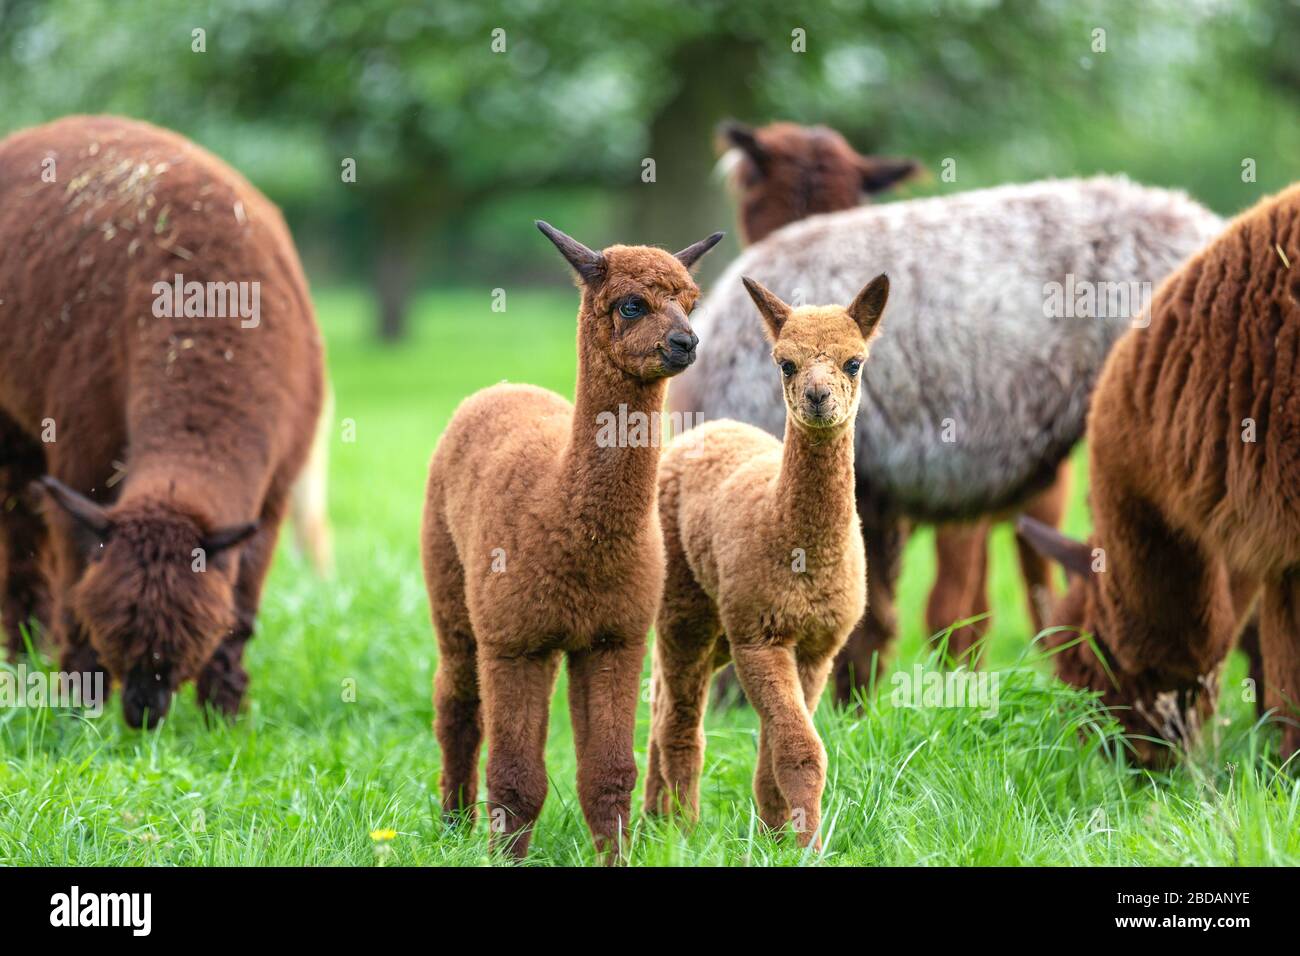 Two young Alpacas in a herd, South American mammal Stock Photo